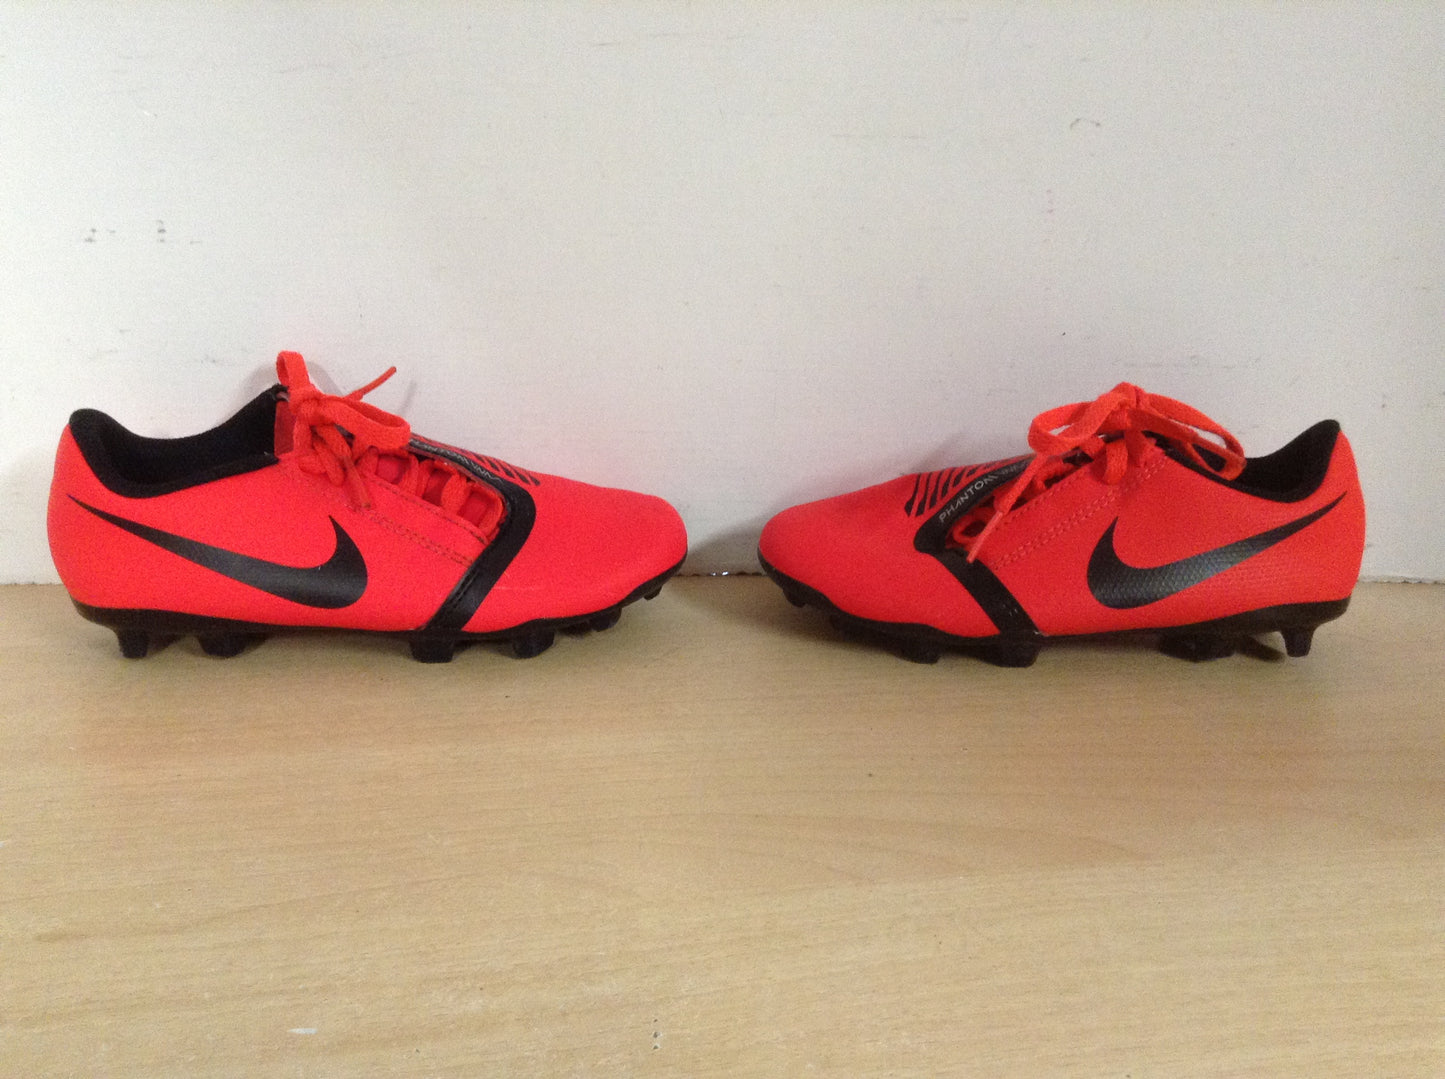 Soccer Shoes Cleats Child Size 13 Nike Phantom Red Black New Demo Model